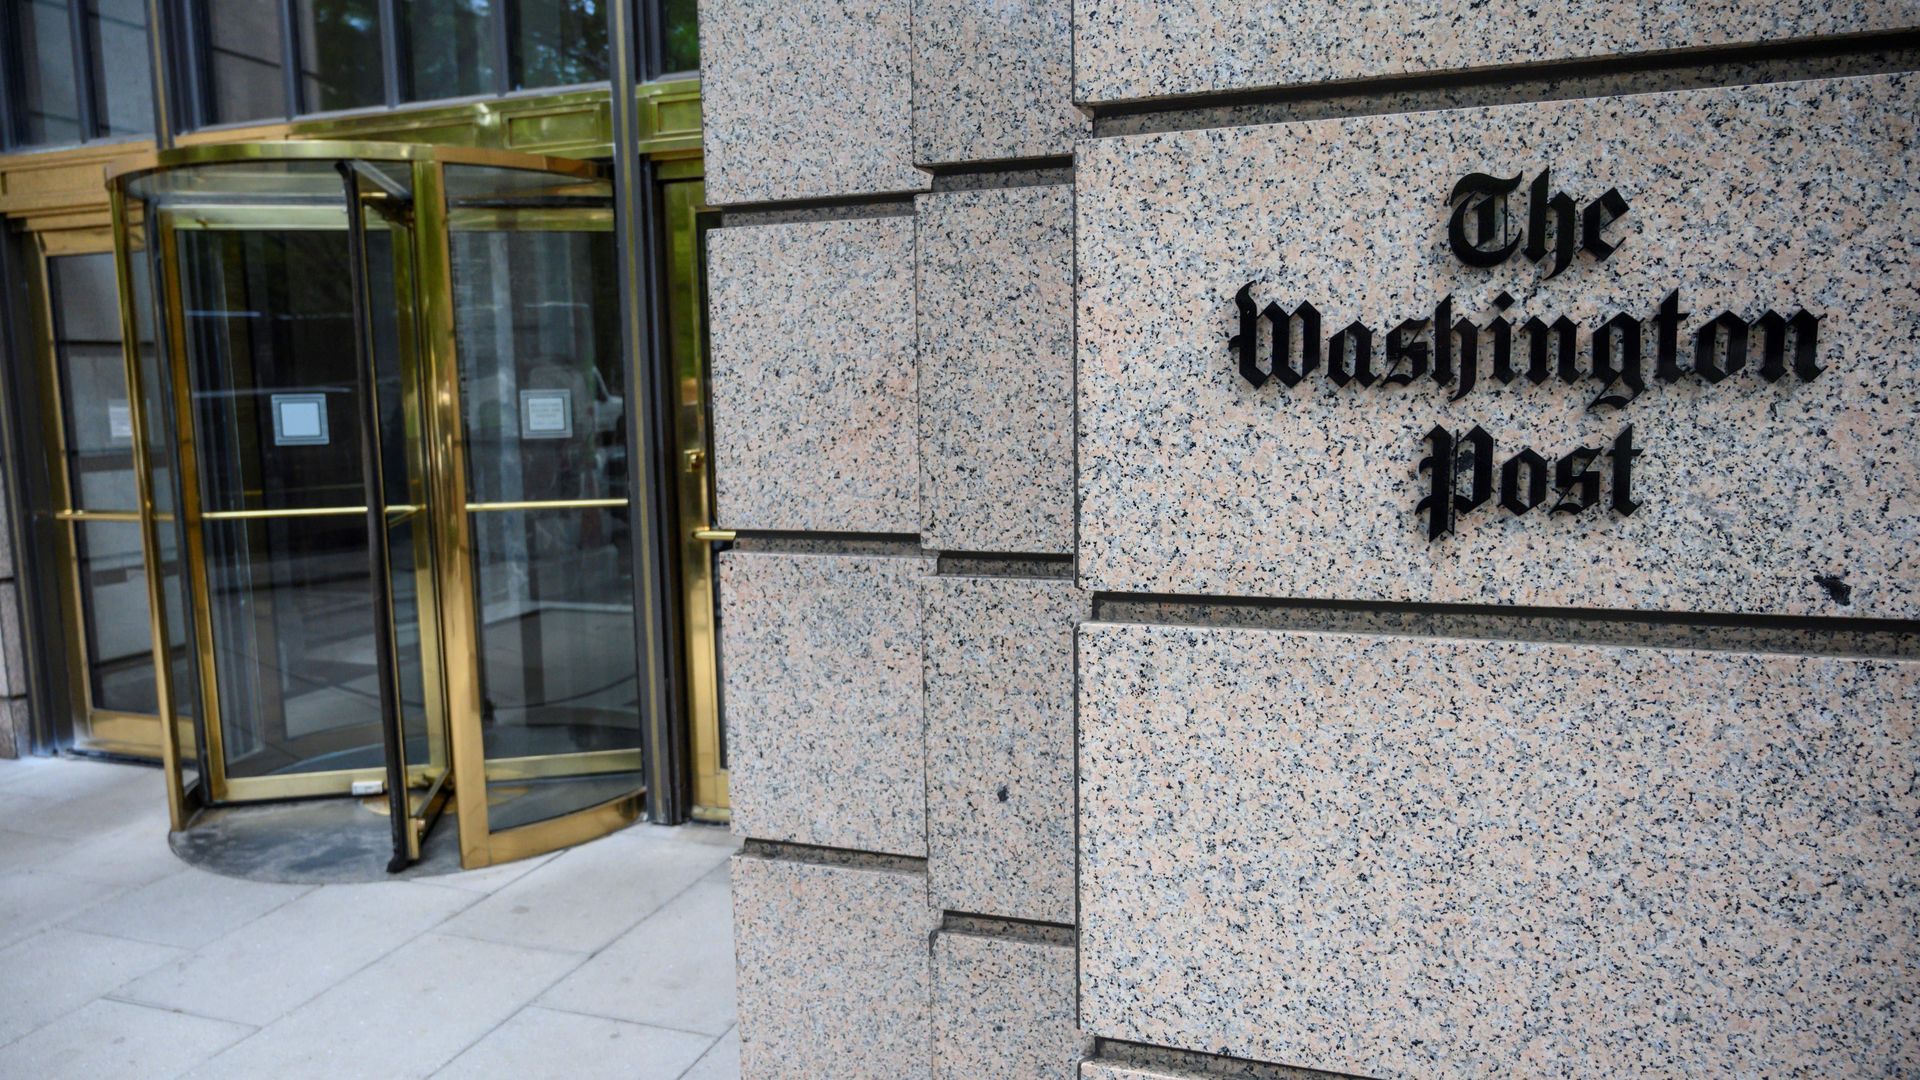 The building of the Washington Post newspaper headquarter is seen on K Street in Washington DC on May 16, 2019